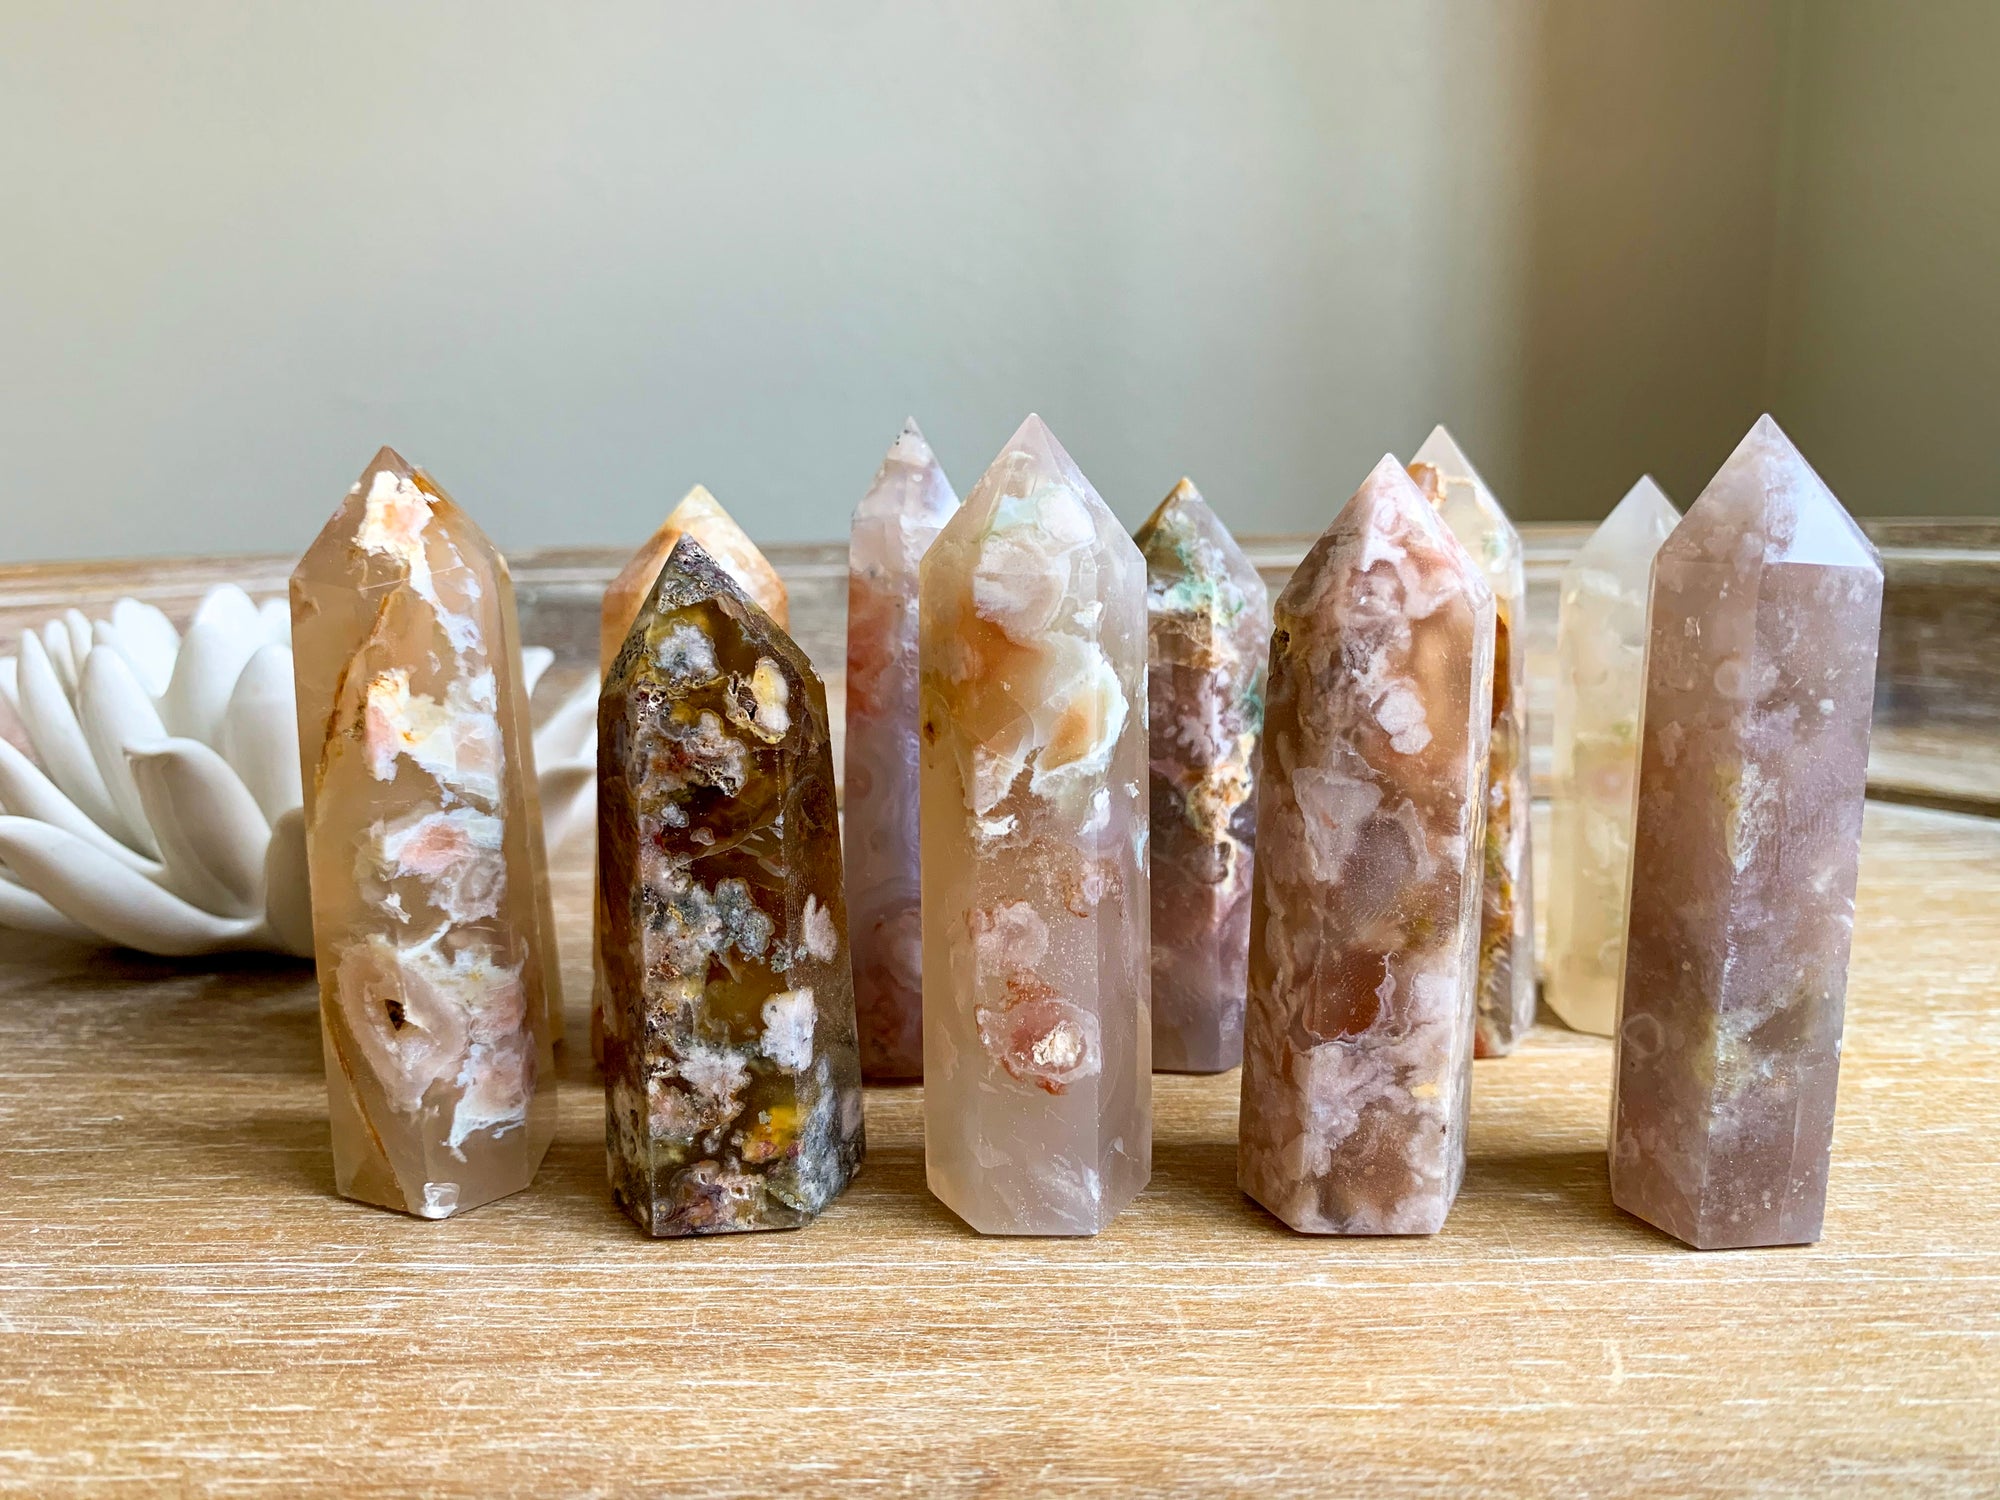 Flower Agate Points